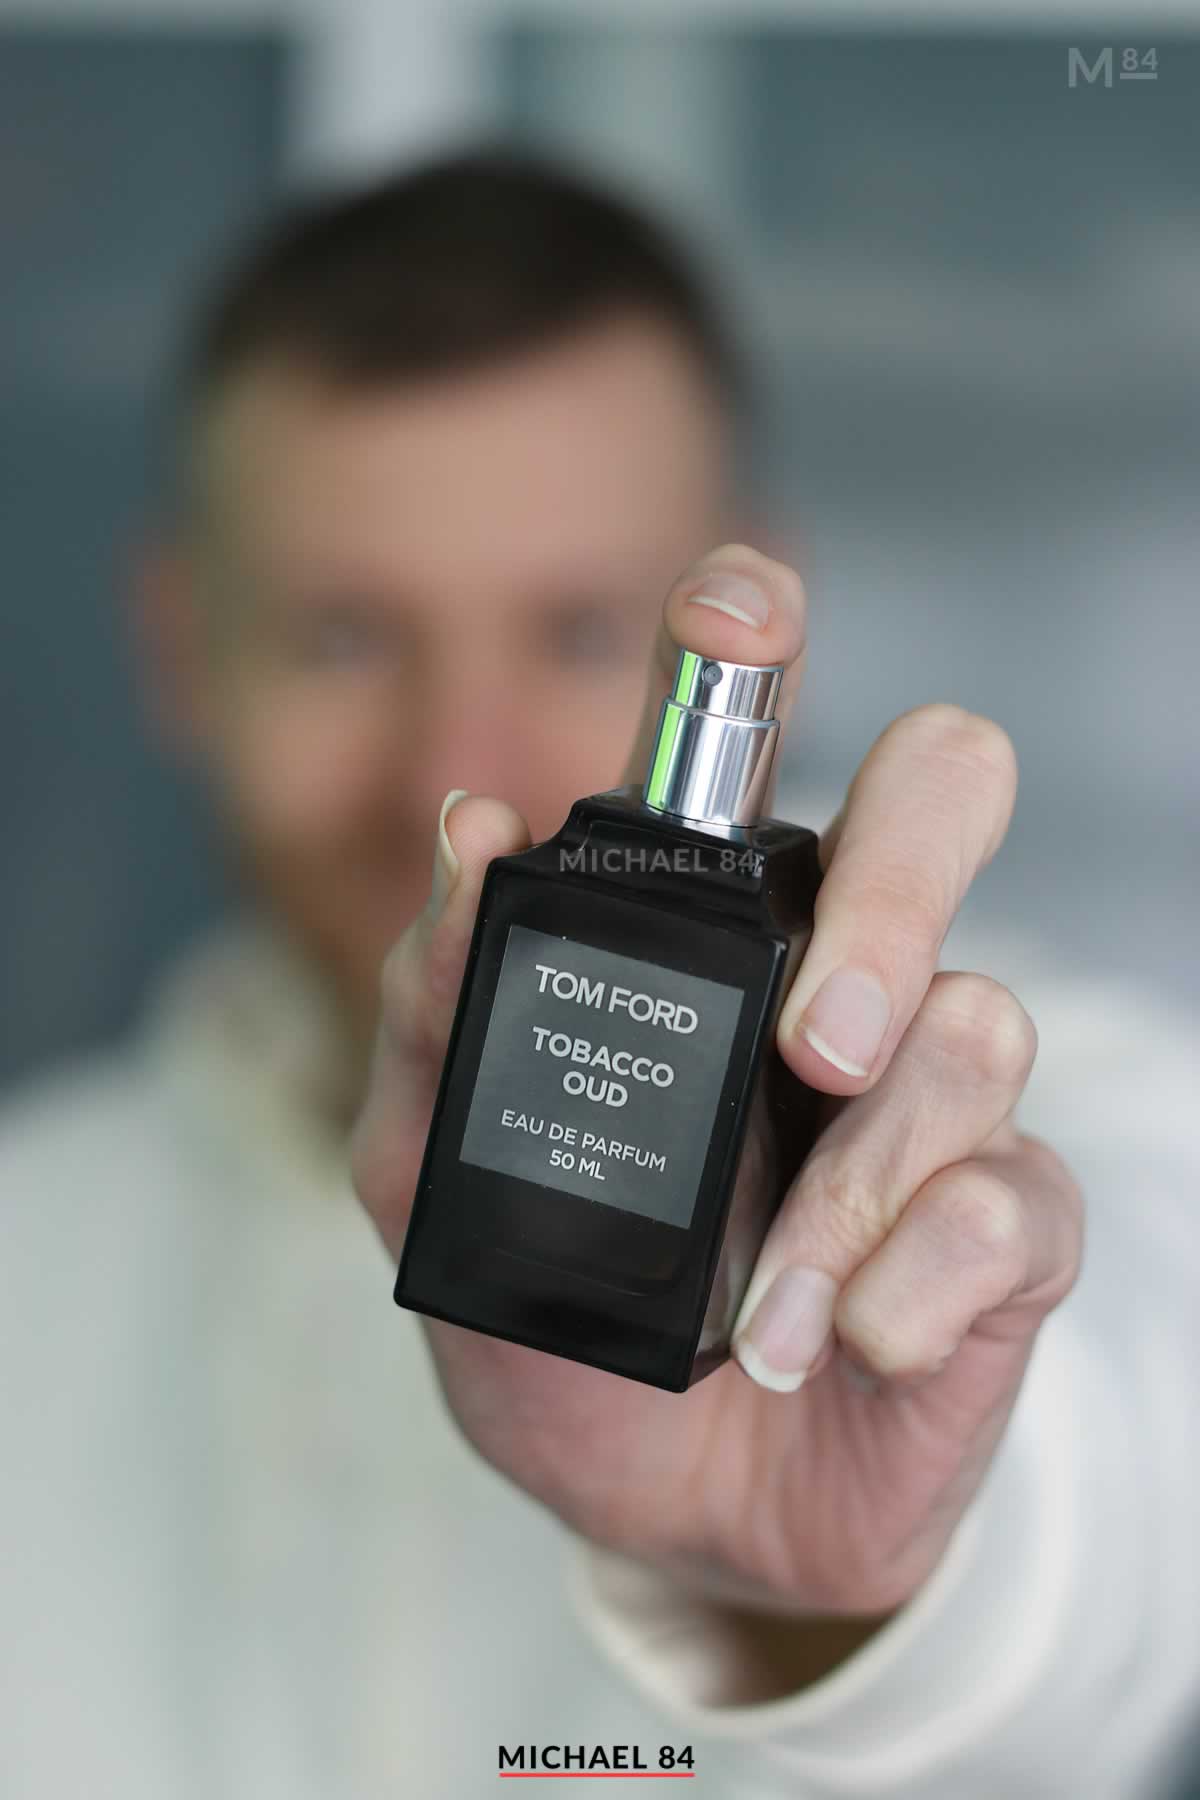 Tom Ford Tobacco Oud Review – It Is Worth It? Here’s What It Smells Like